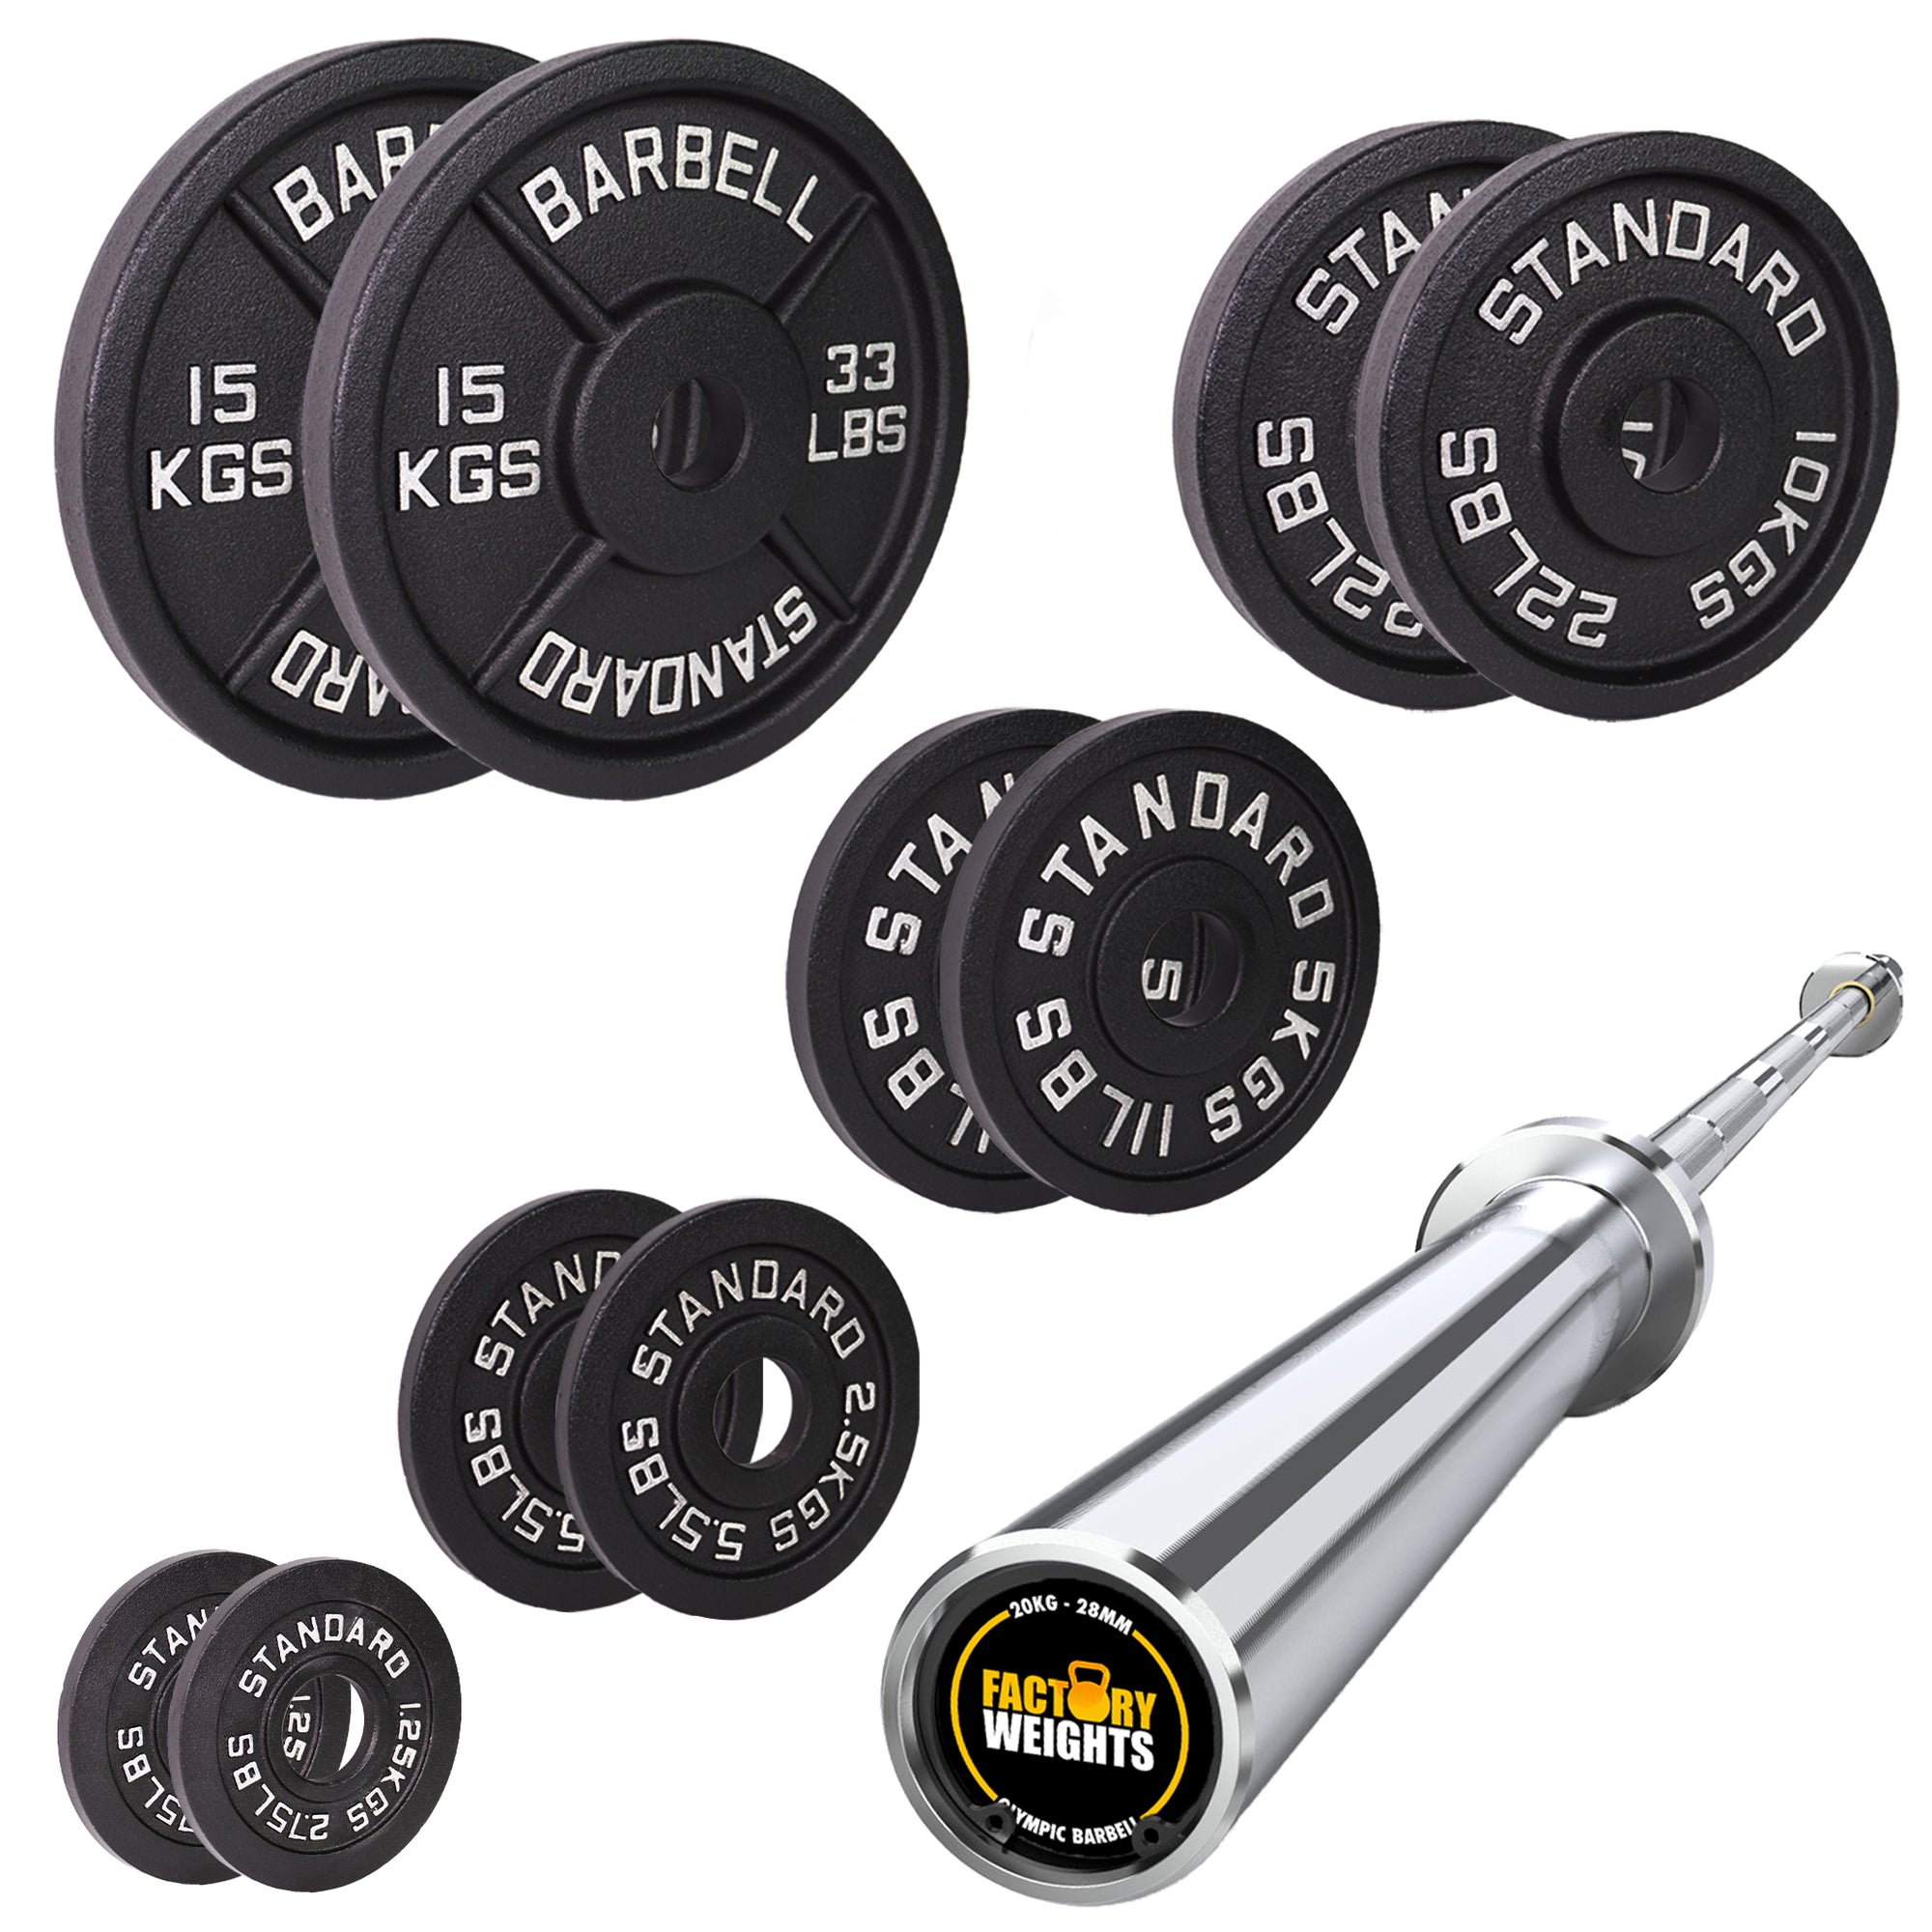 67.5kg Cast Iron Plate Set With Barbell NO UPGRADE NO UPGRADE NO UPGRADE